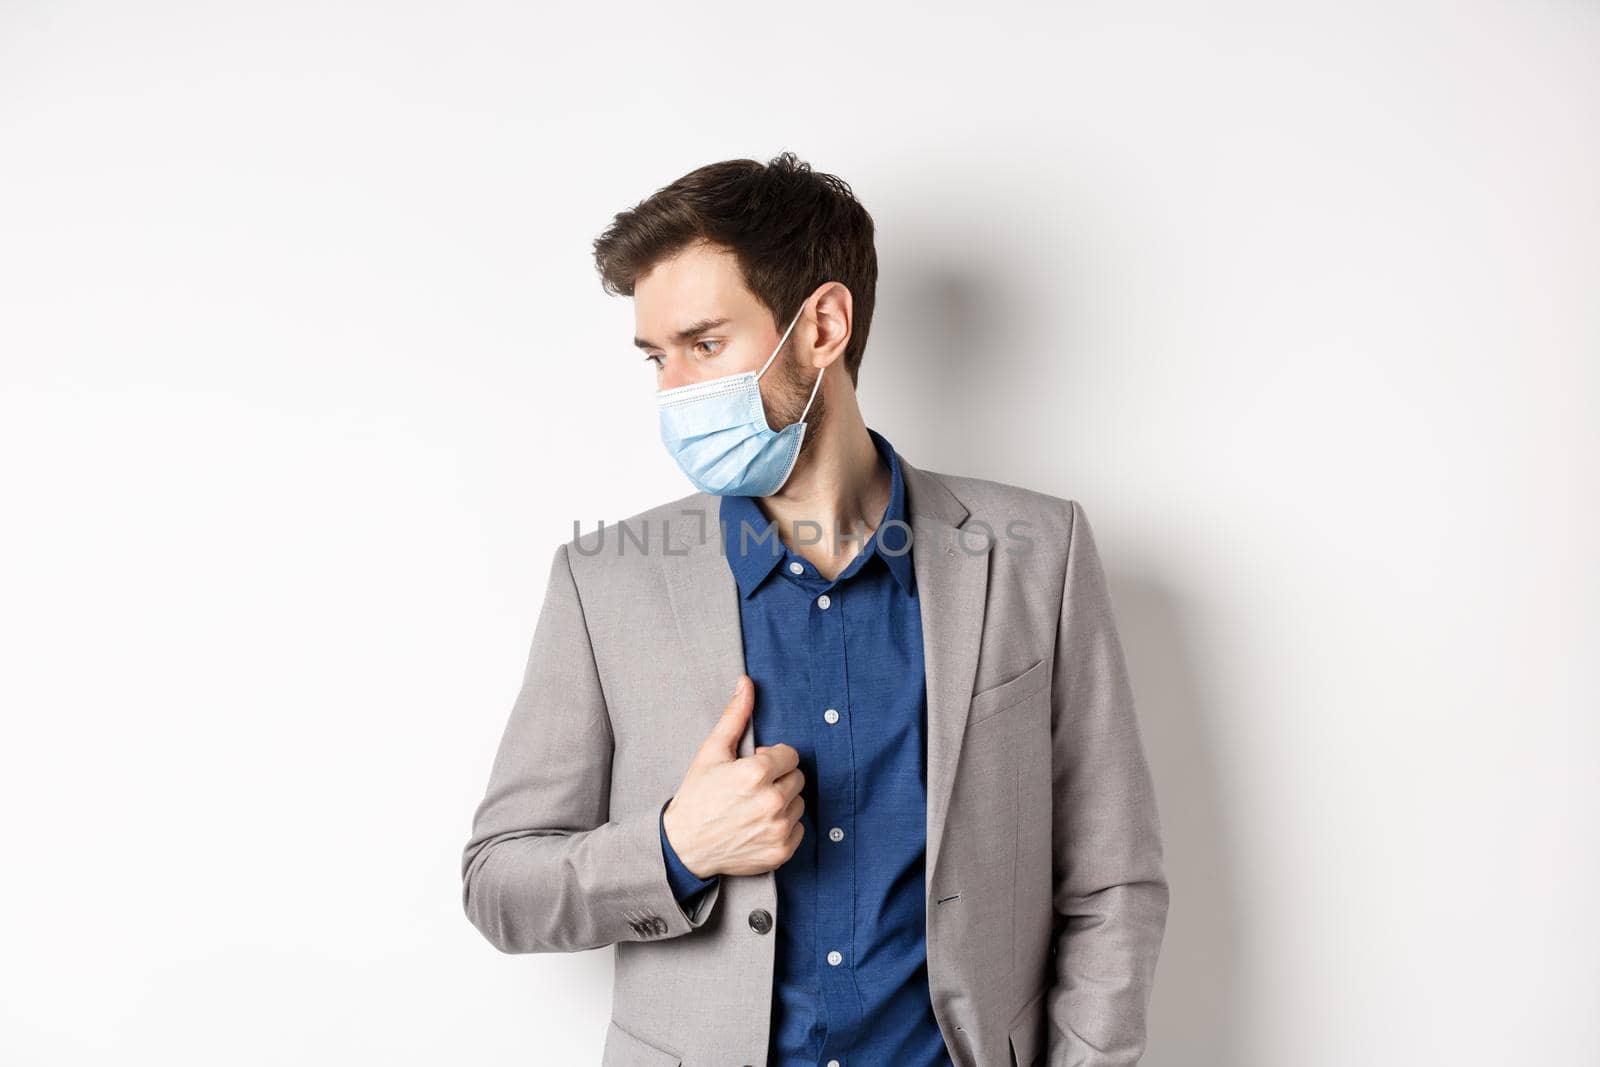 Covid, pandemic and business concept. Handsome male entrepreneur wearing stylish suit and medical mask, looking aside, white background.